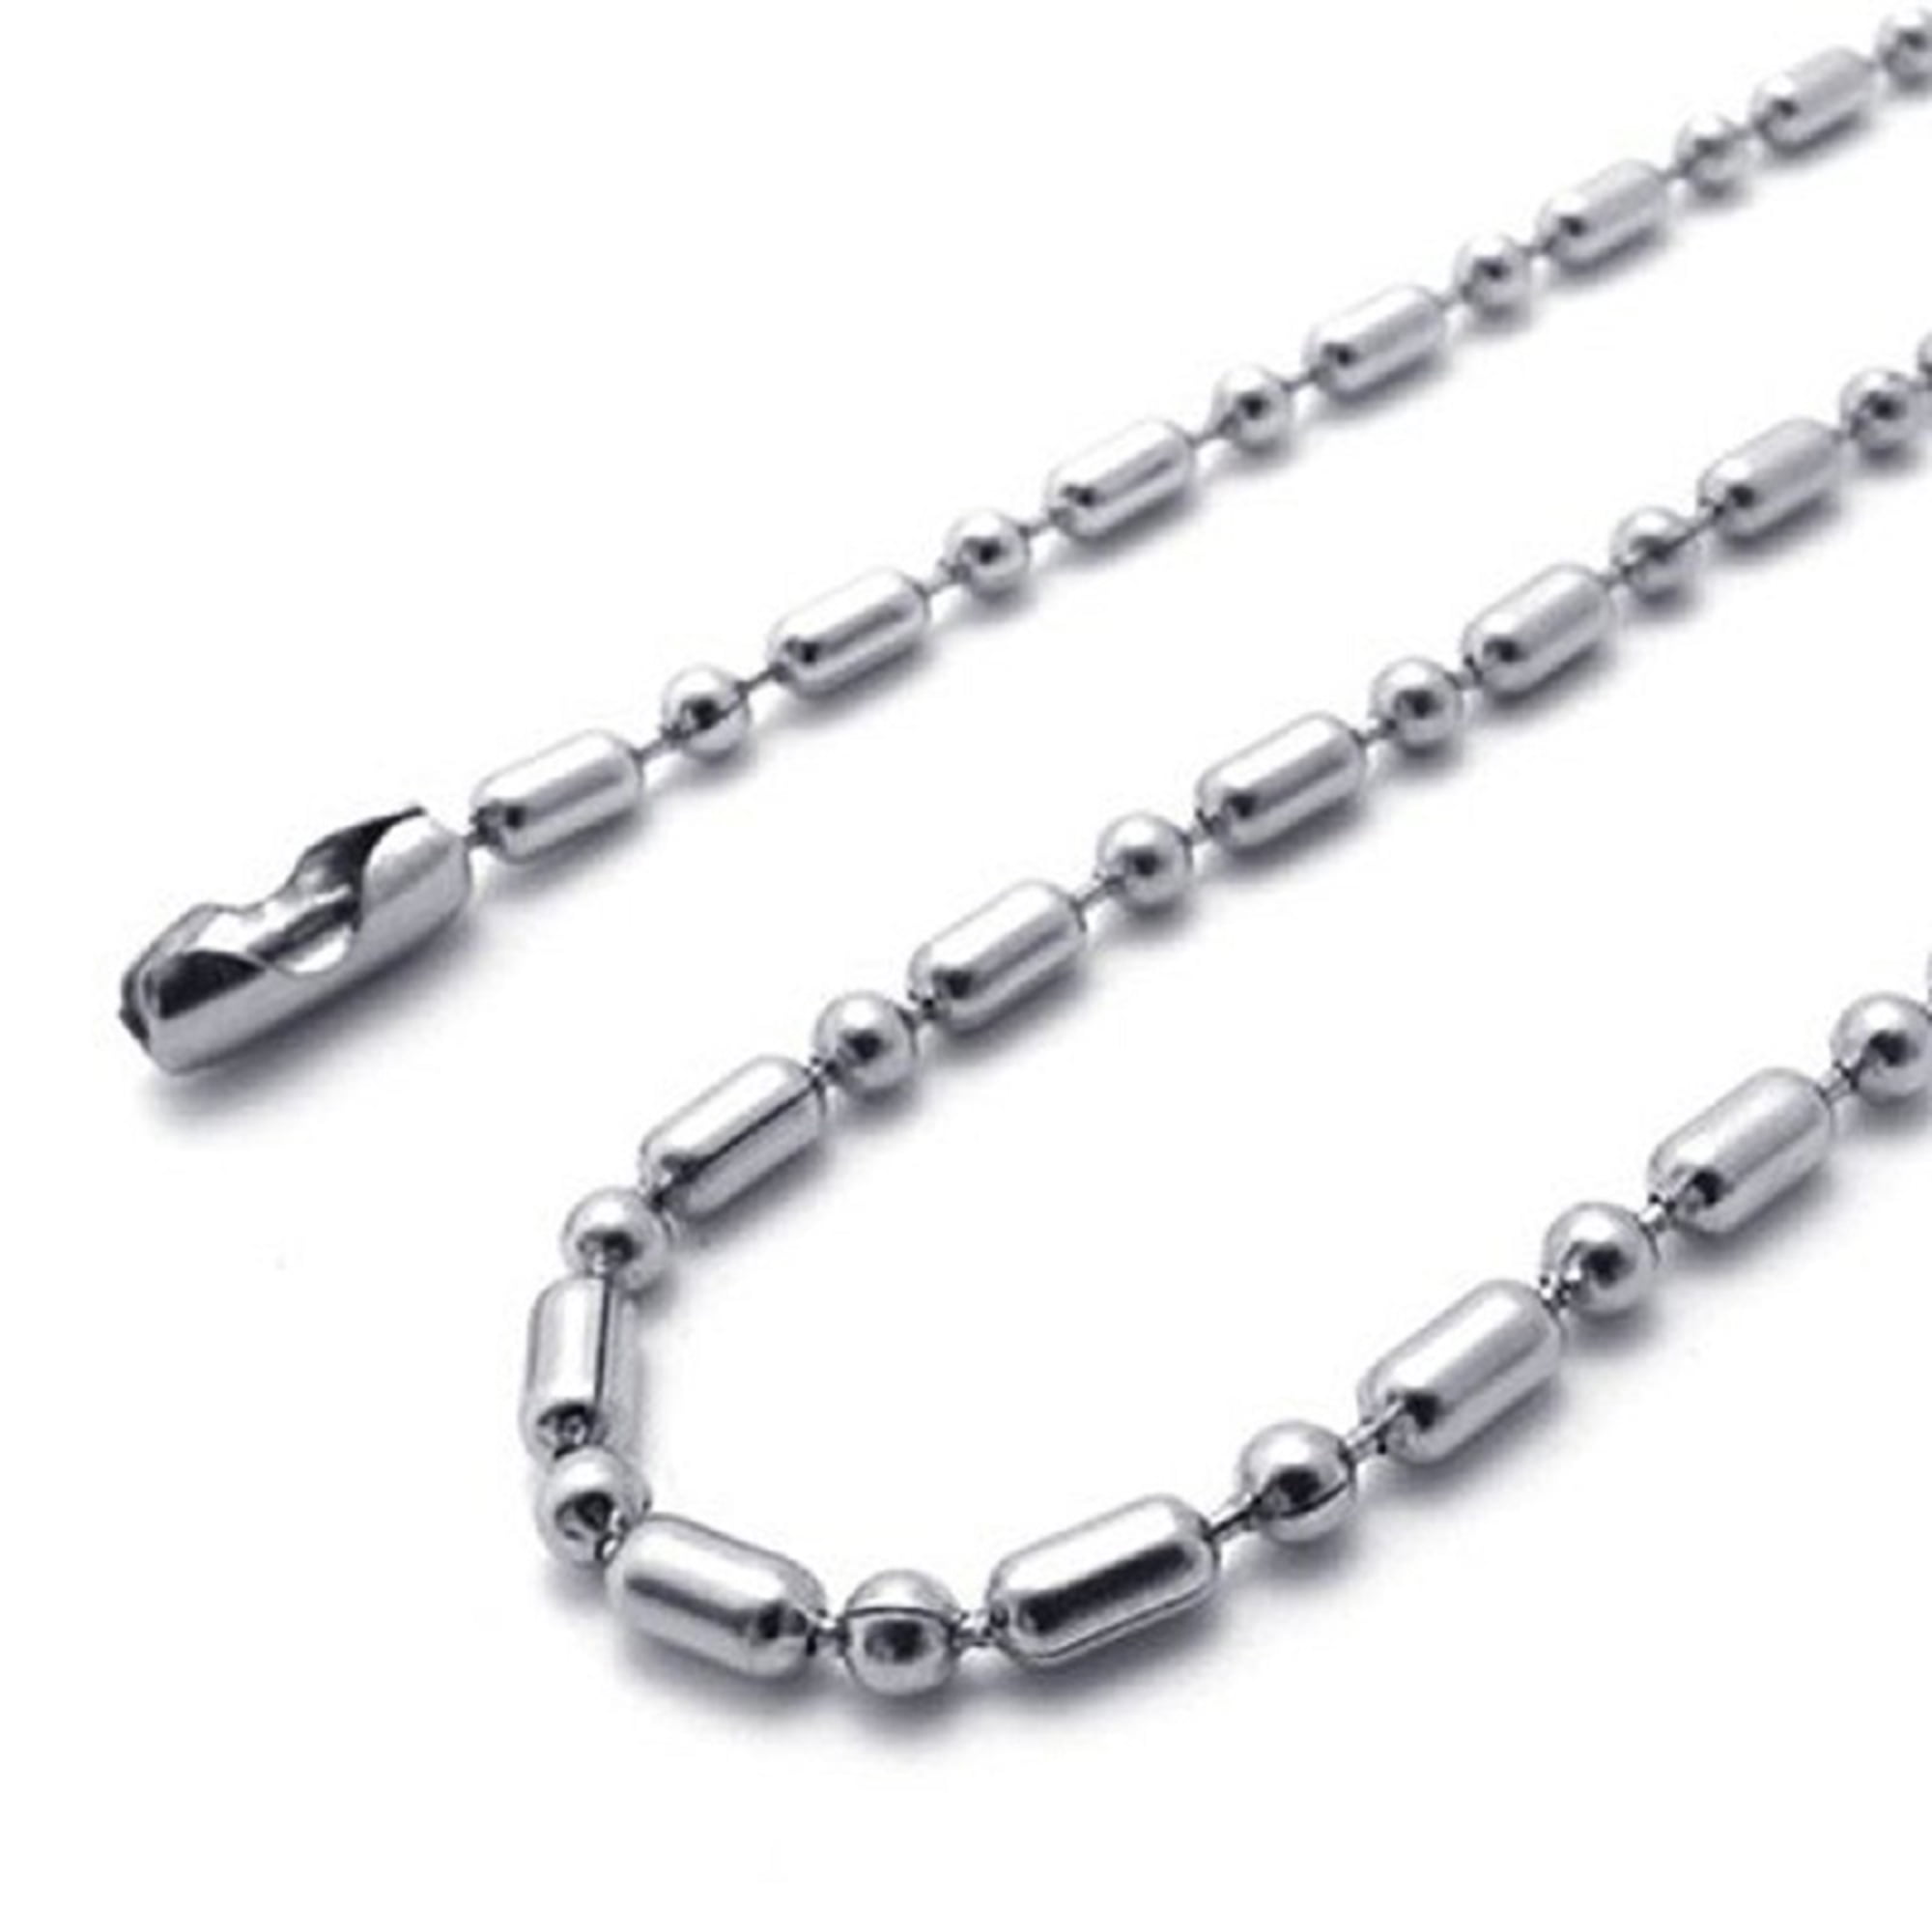 5pcs Metal Silver Plated Round Ball Bead Chain Necklace  600mm 